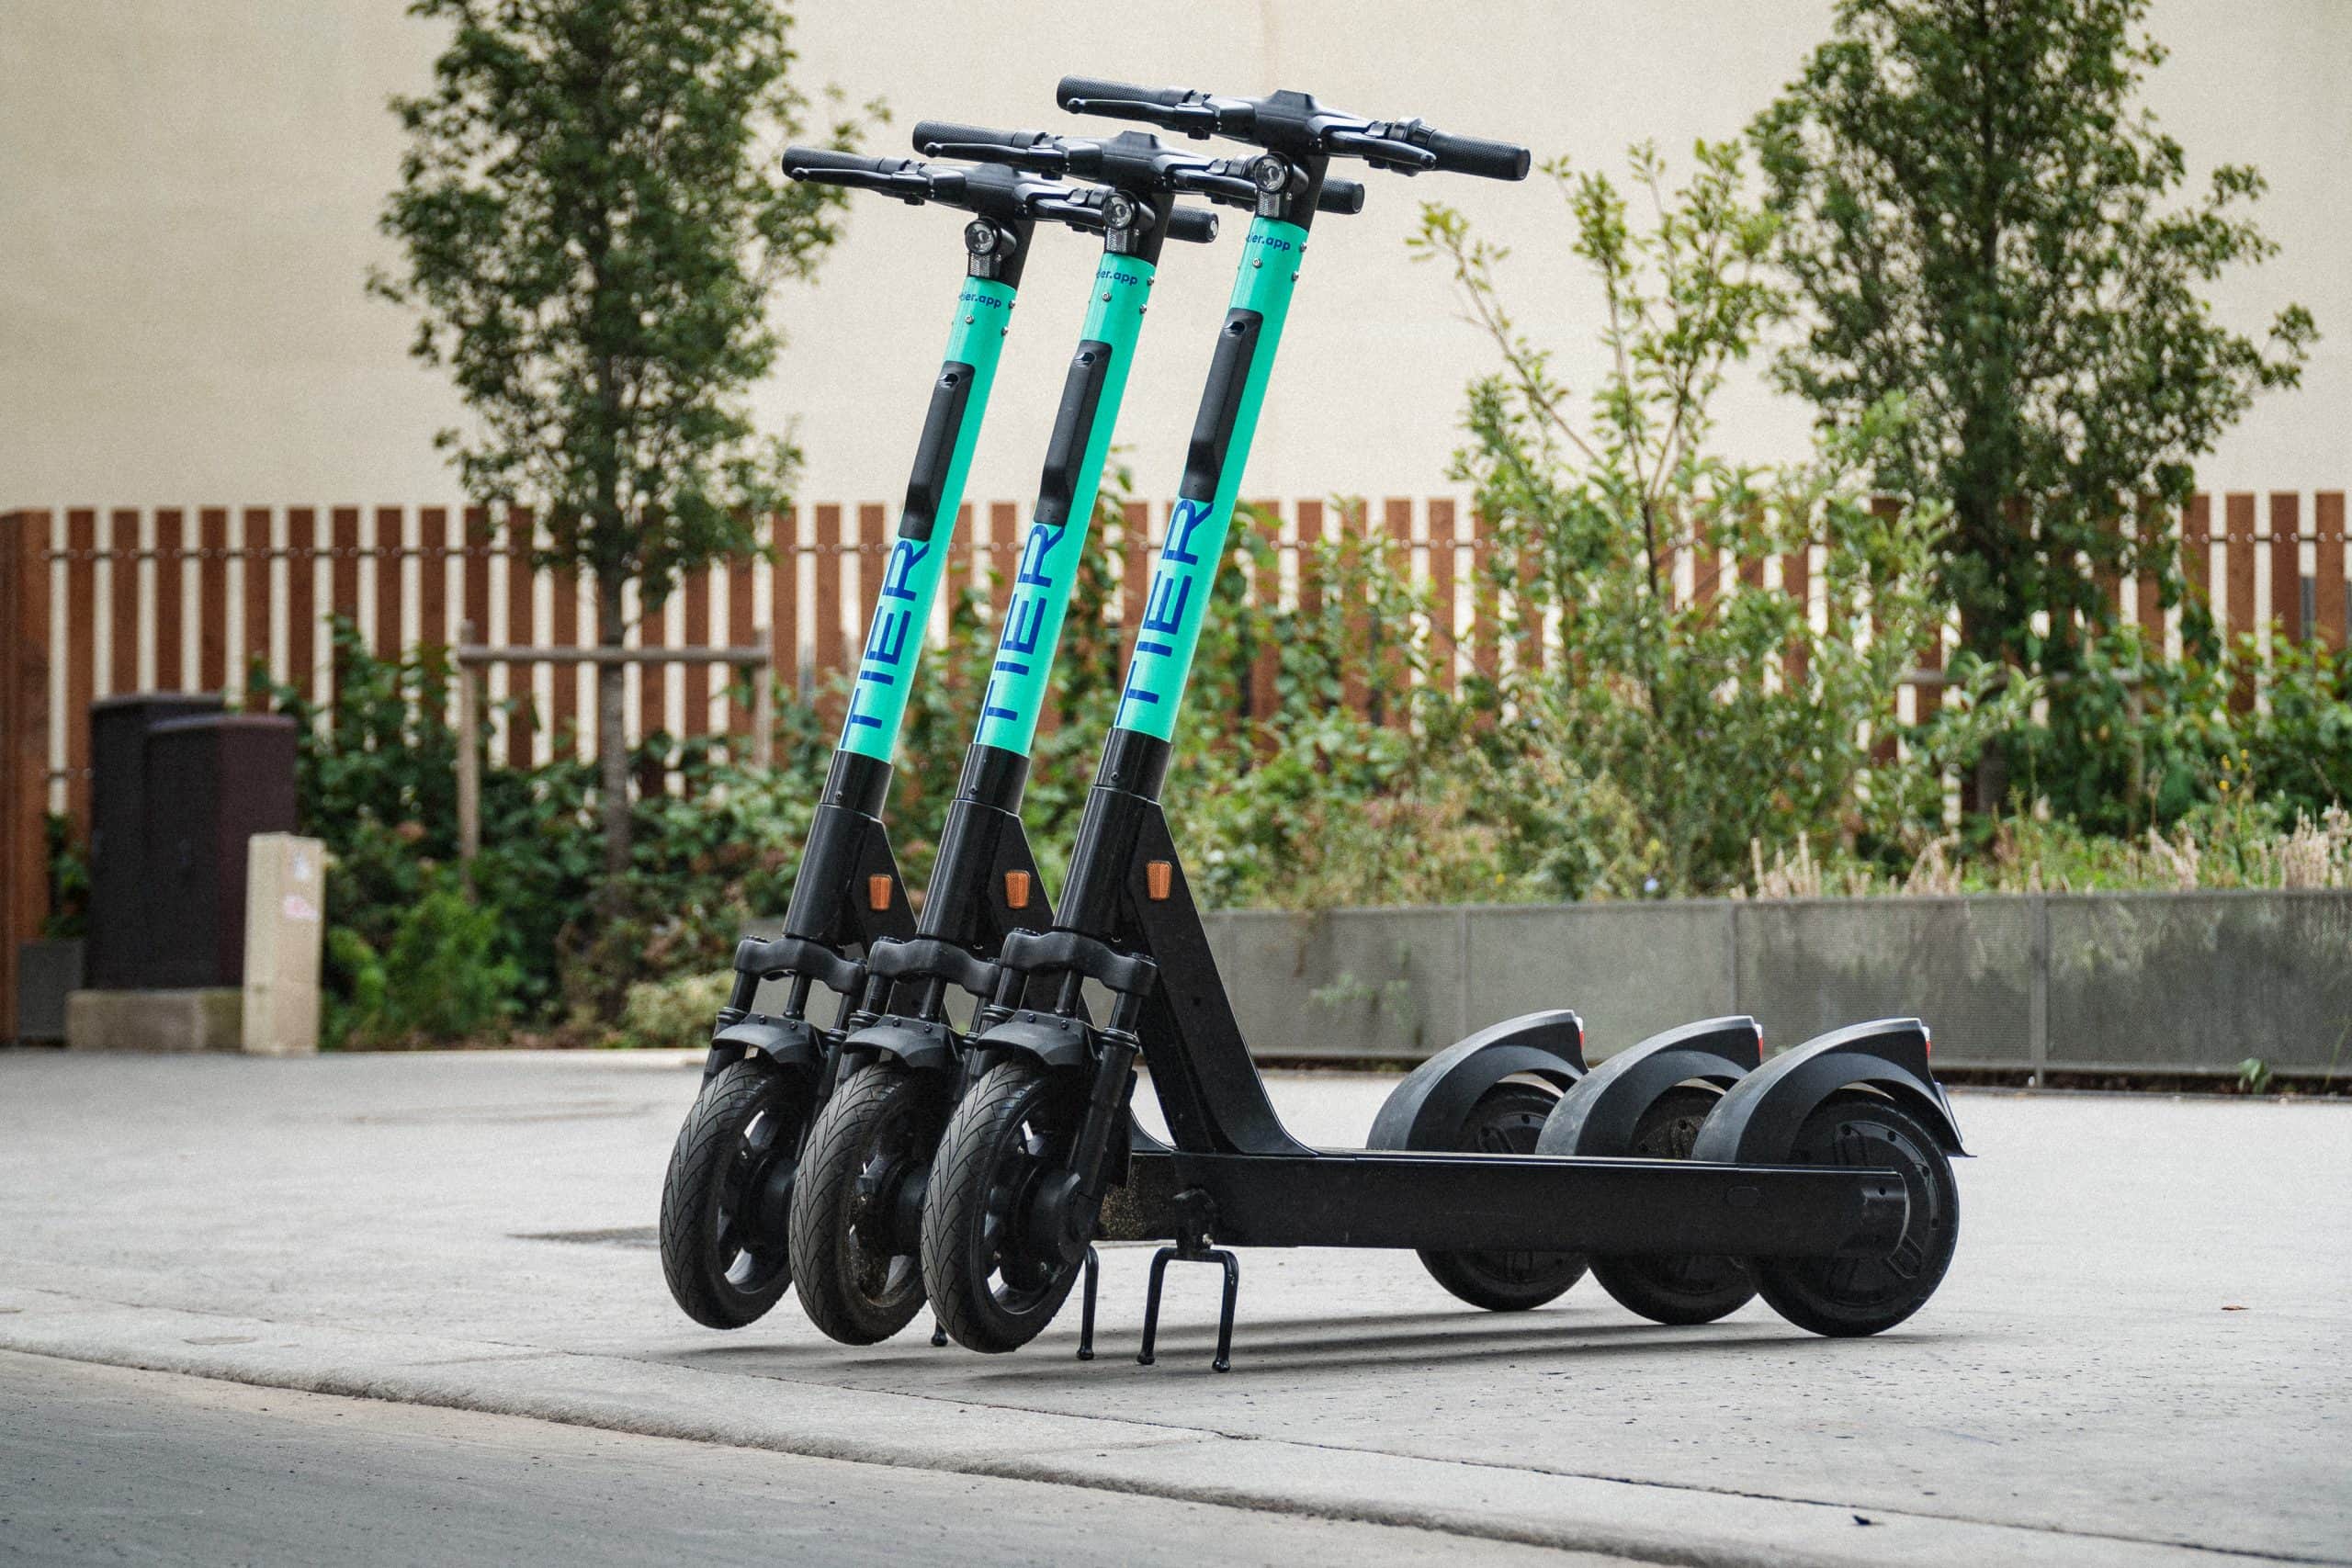 E-scooter Tier raises £190m year-long trial in York | electric bike buying advice and news - ebiketips